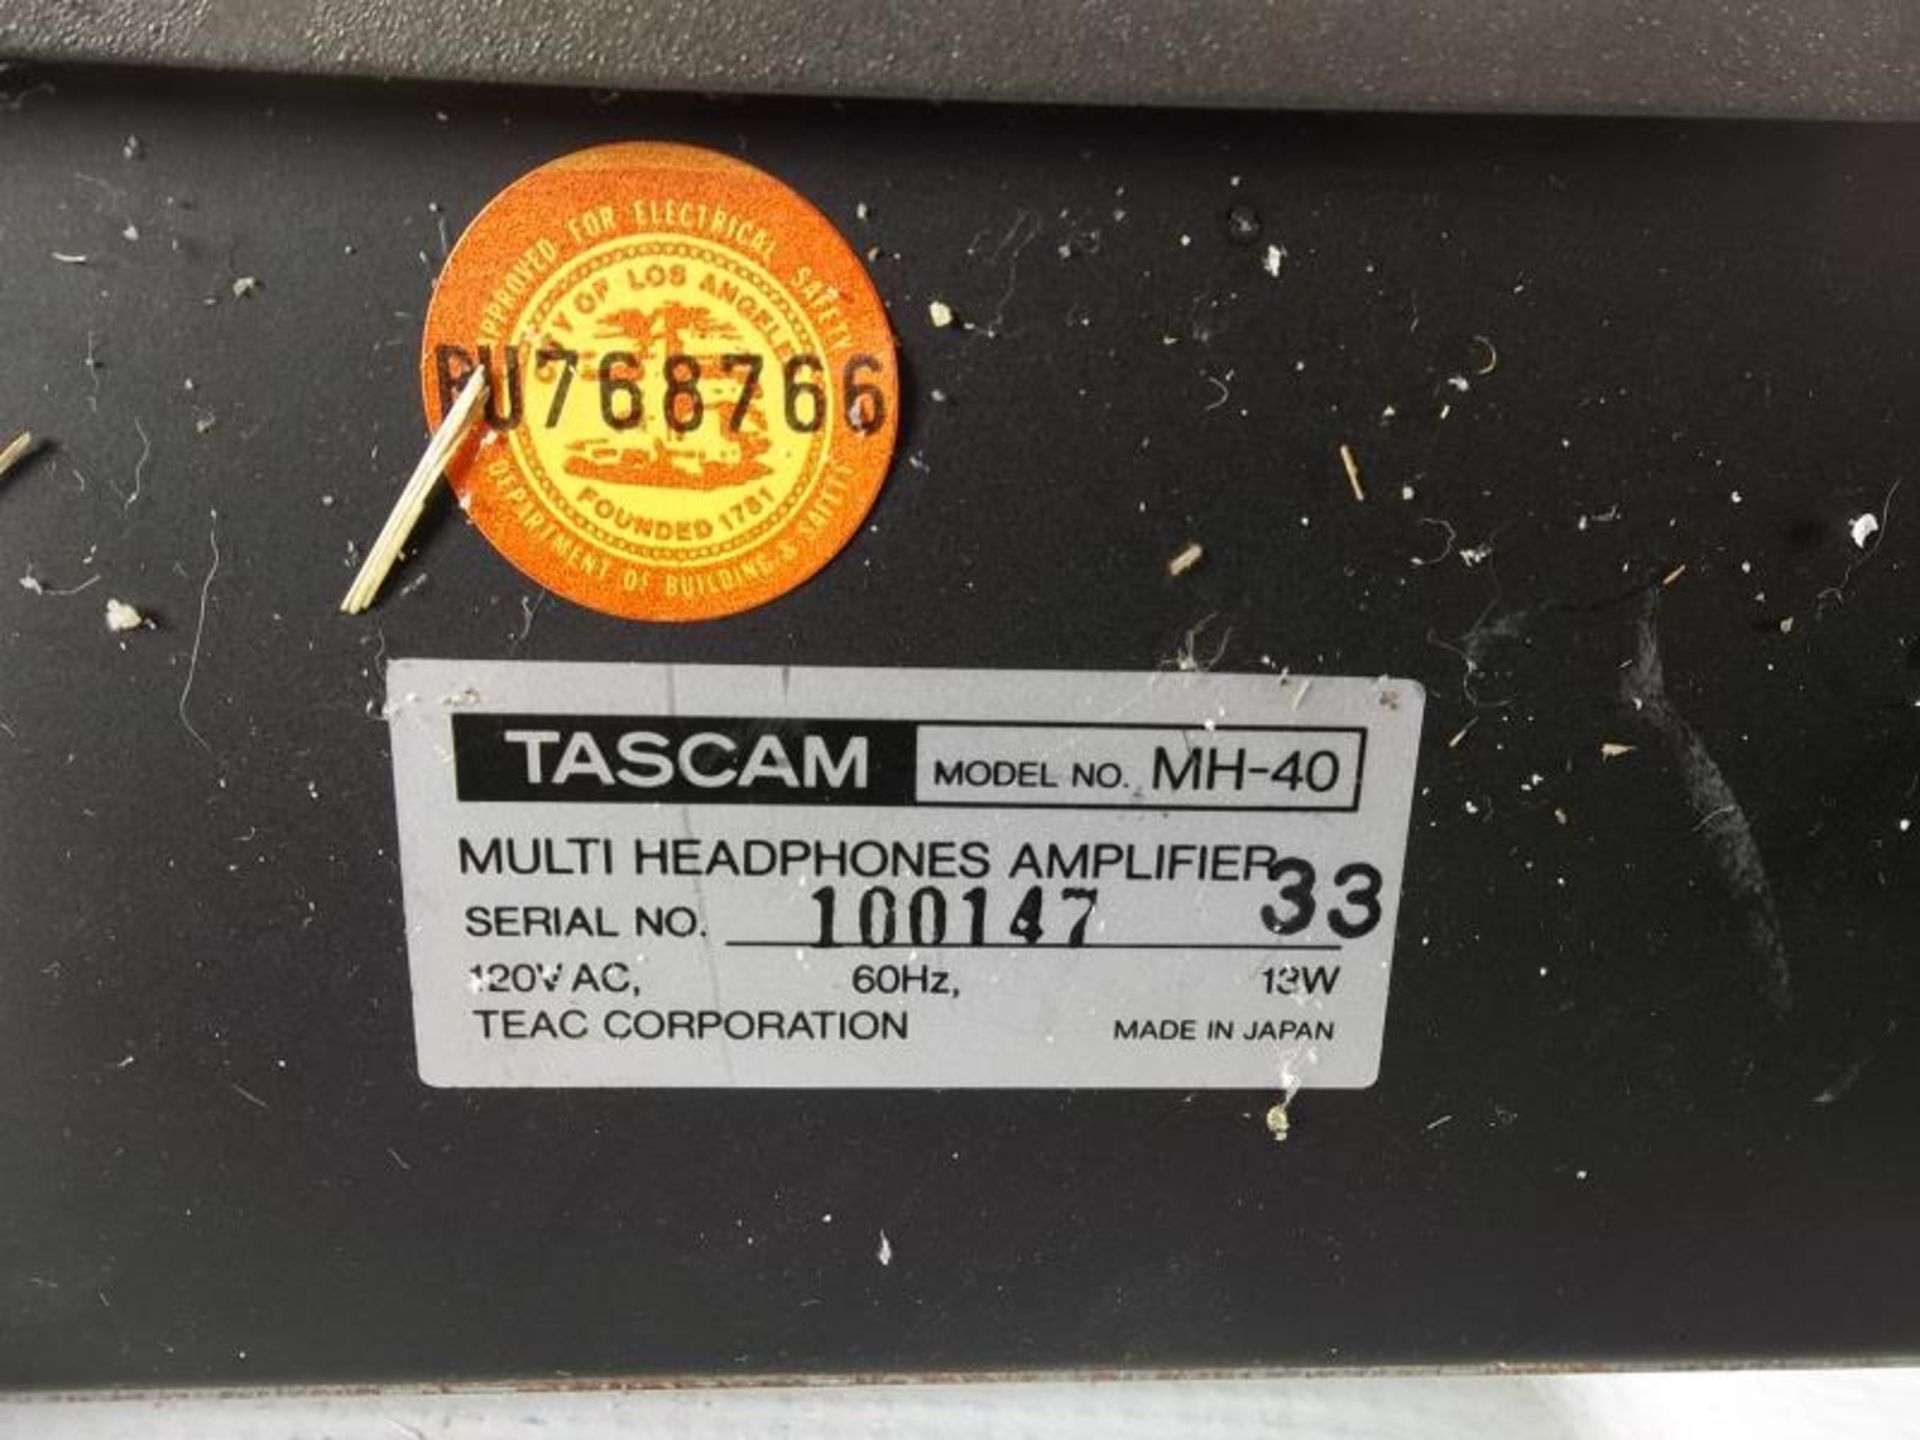 Tascam MH-40 Multi Headphone Amp, s# 100147, rack mountable, tested - powers up - Image 4 of 5